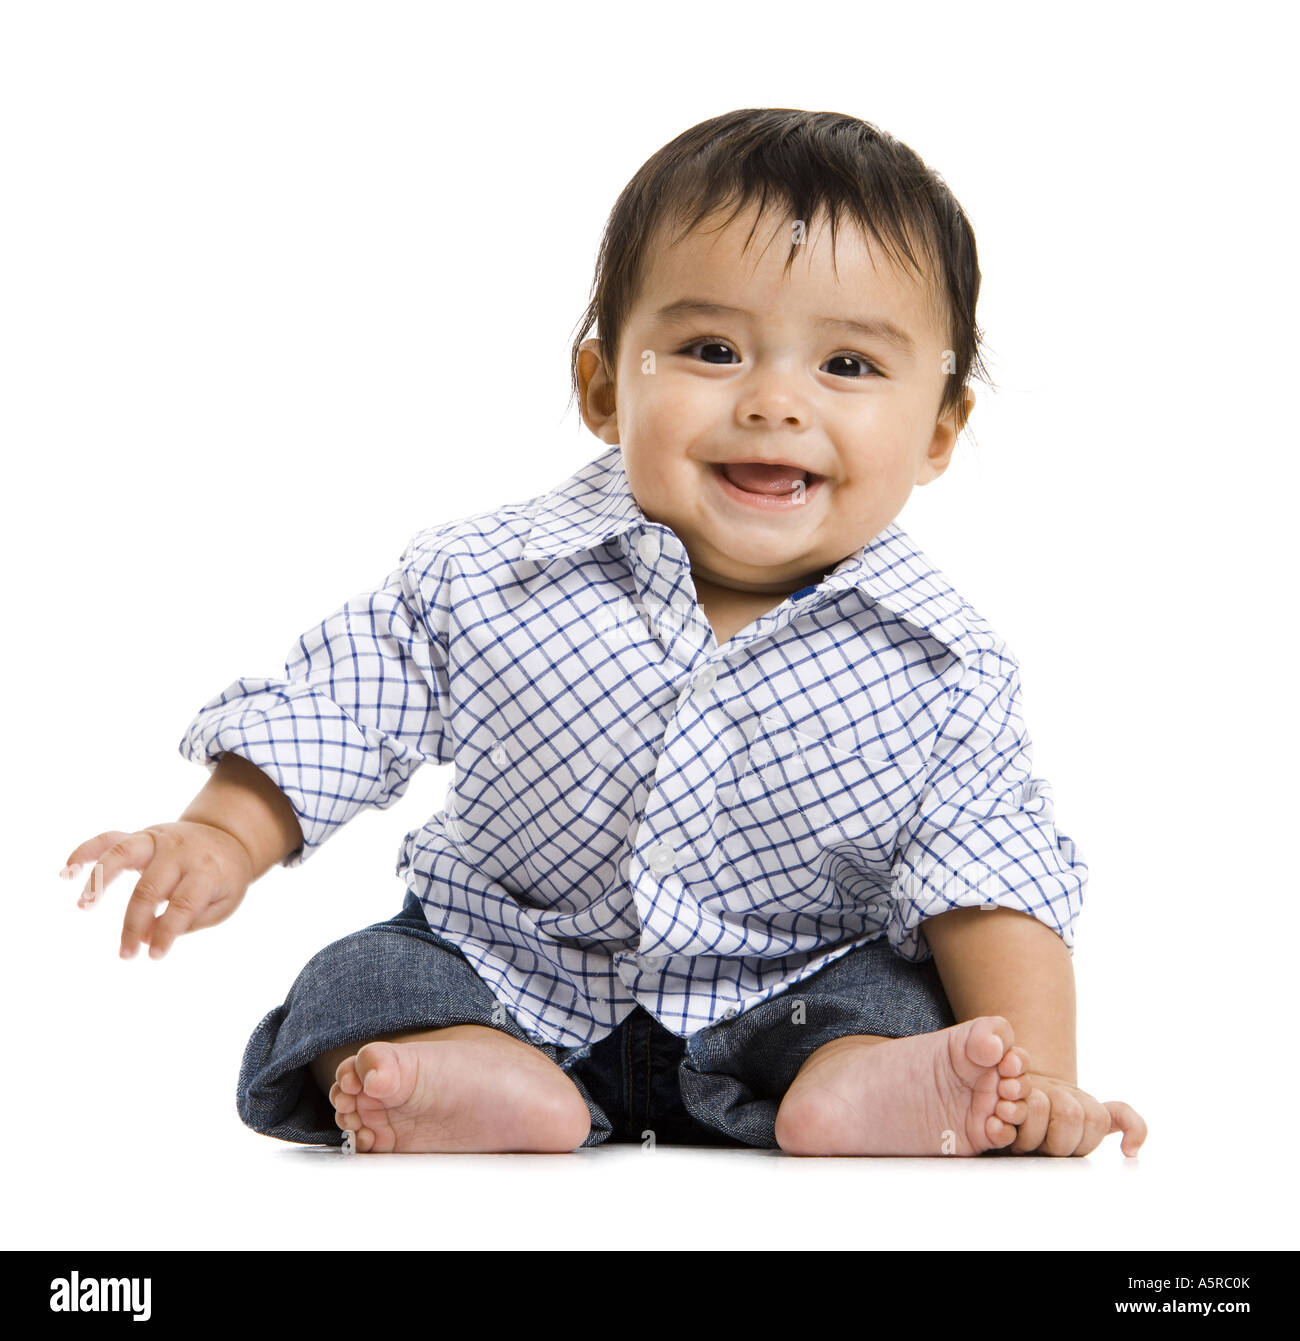 Baby Boy sitting and smiling Stock Photo